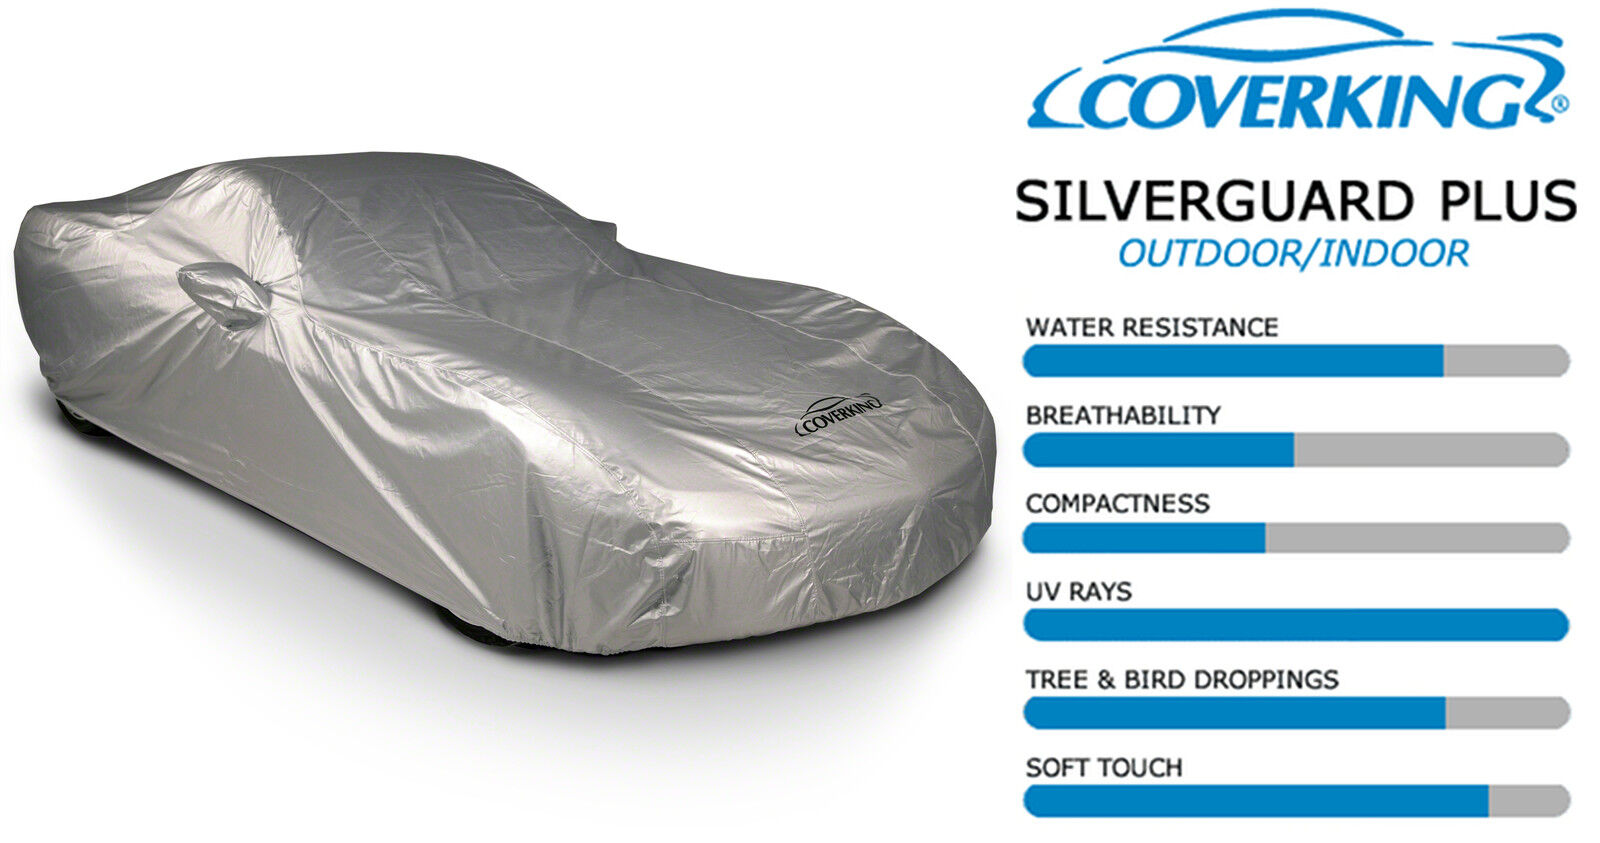 COVERKING SILVERGUARD PLUS all-weather CAR COVER made for 1977-1986 Lotus Esprit